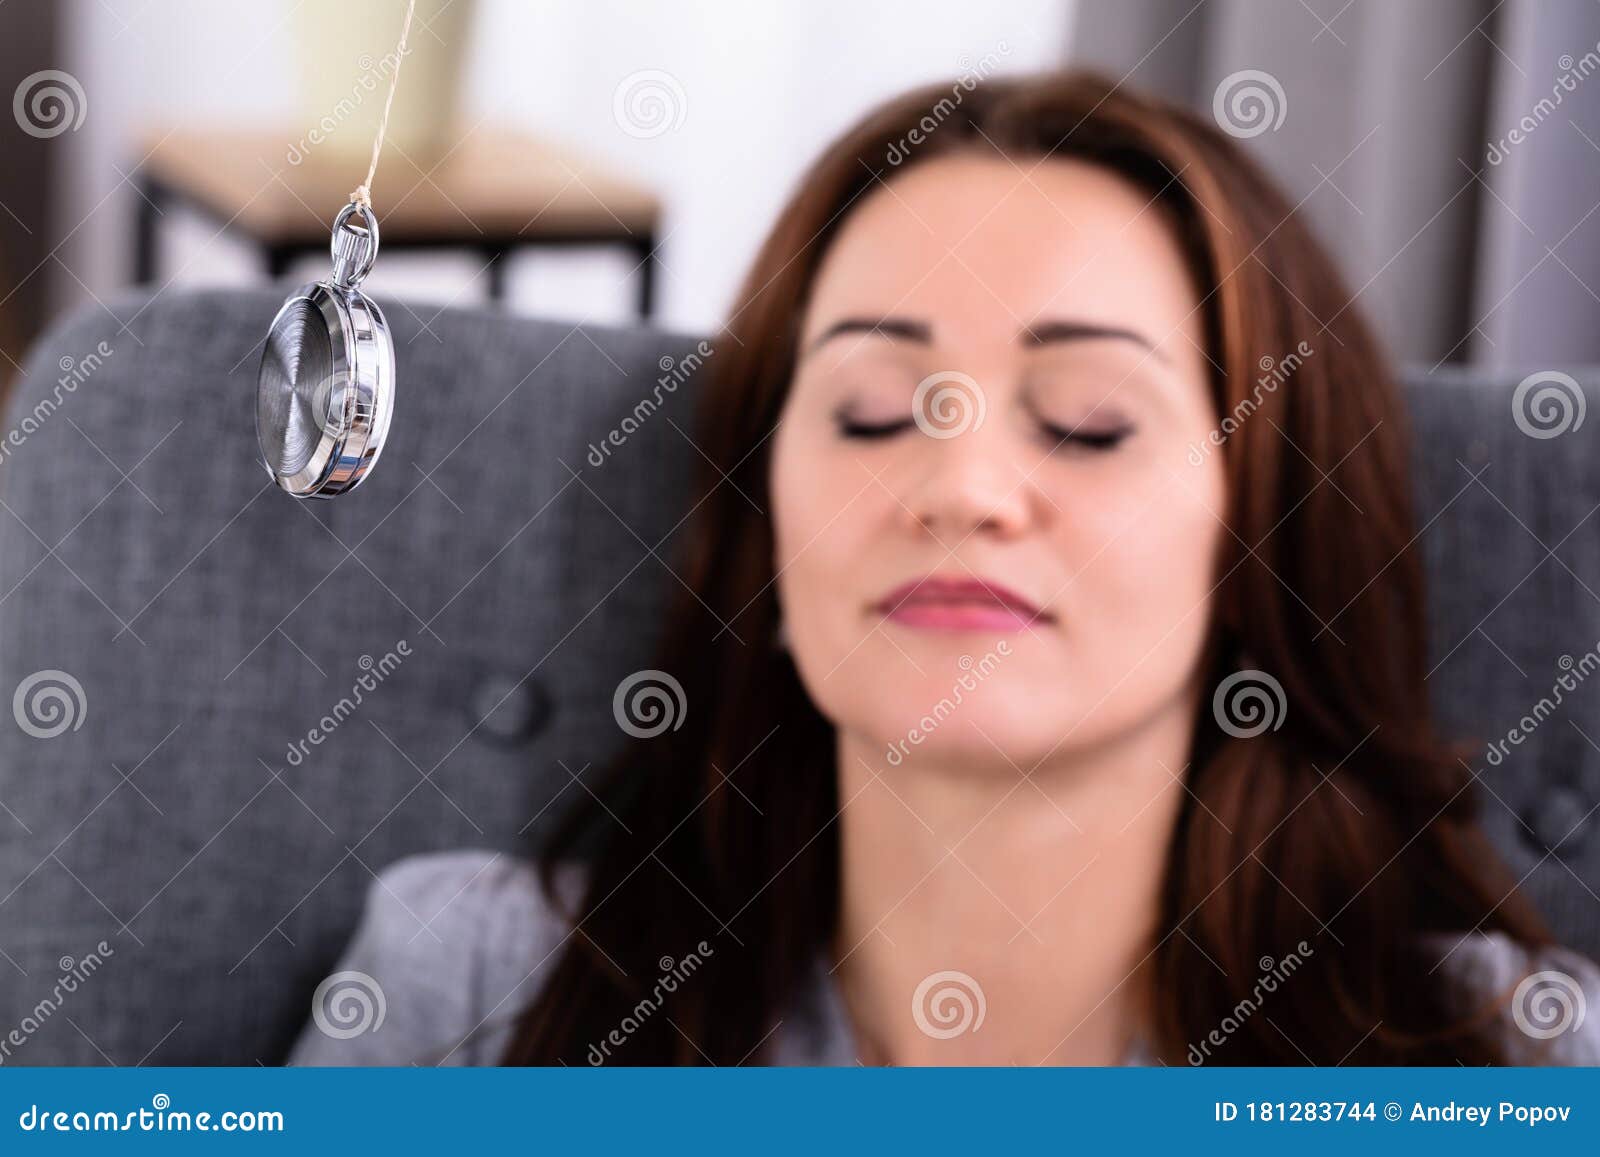 woman being hypnotized while sitting on sofa